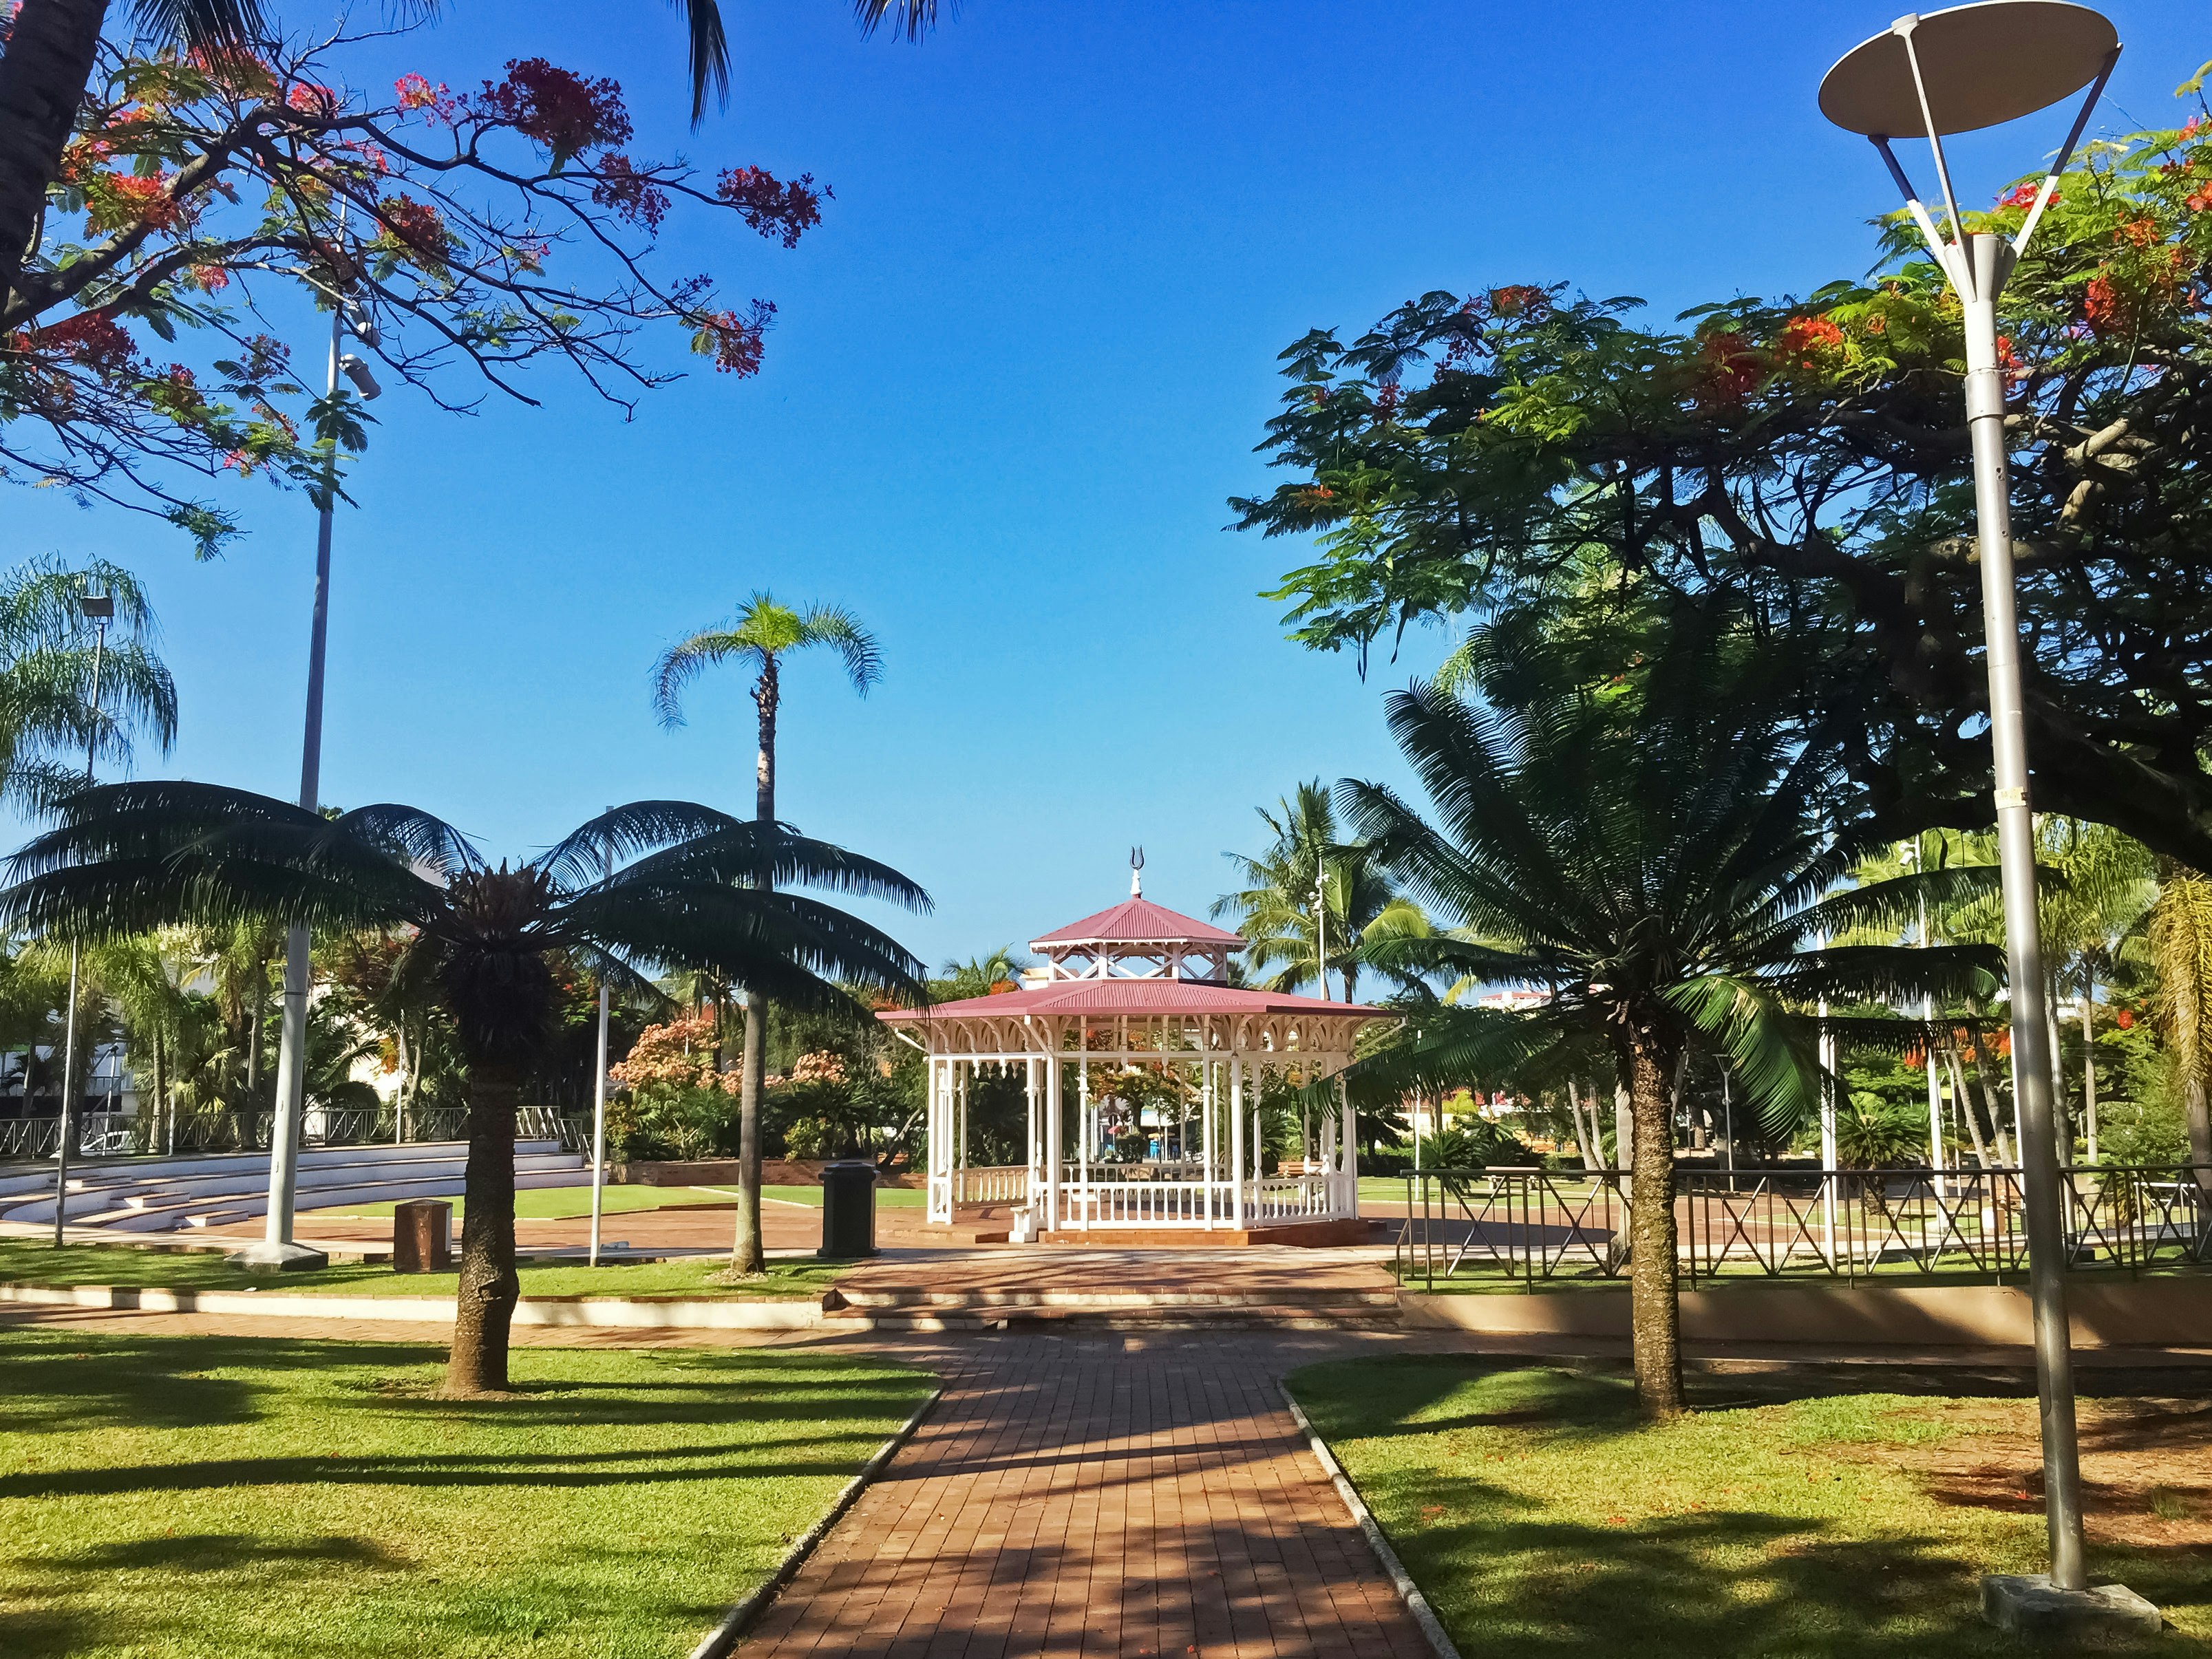 green trees and brown and white gazebo under blue sky during daytime